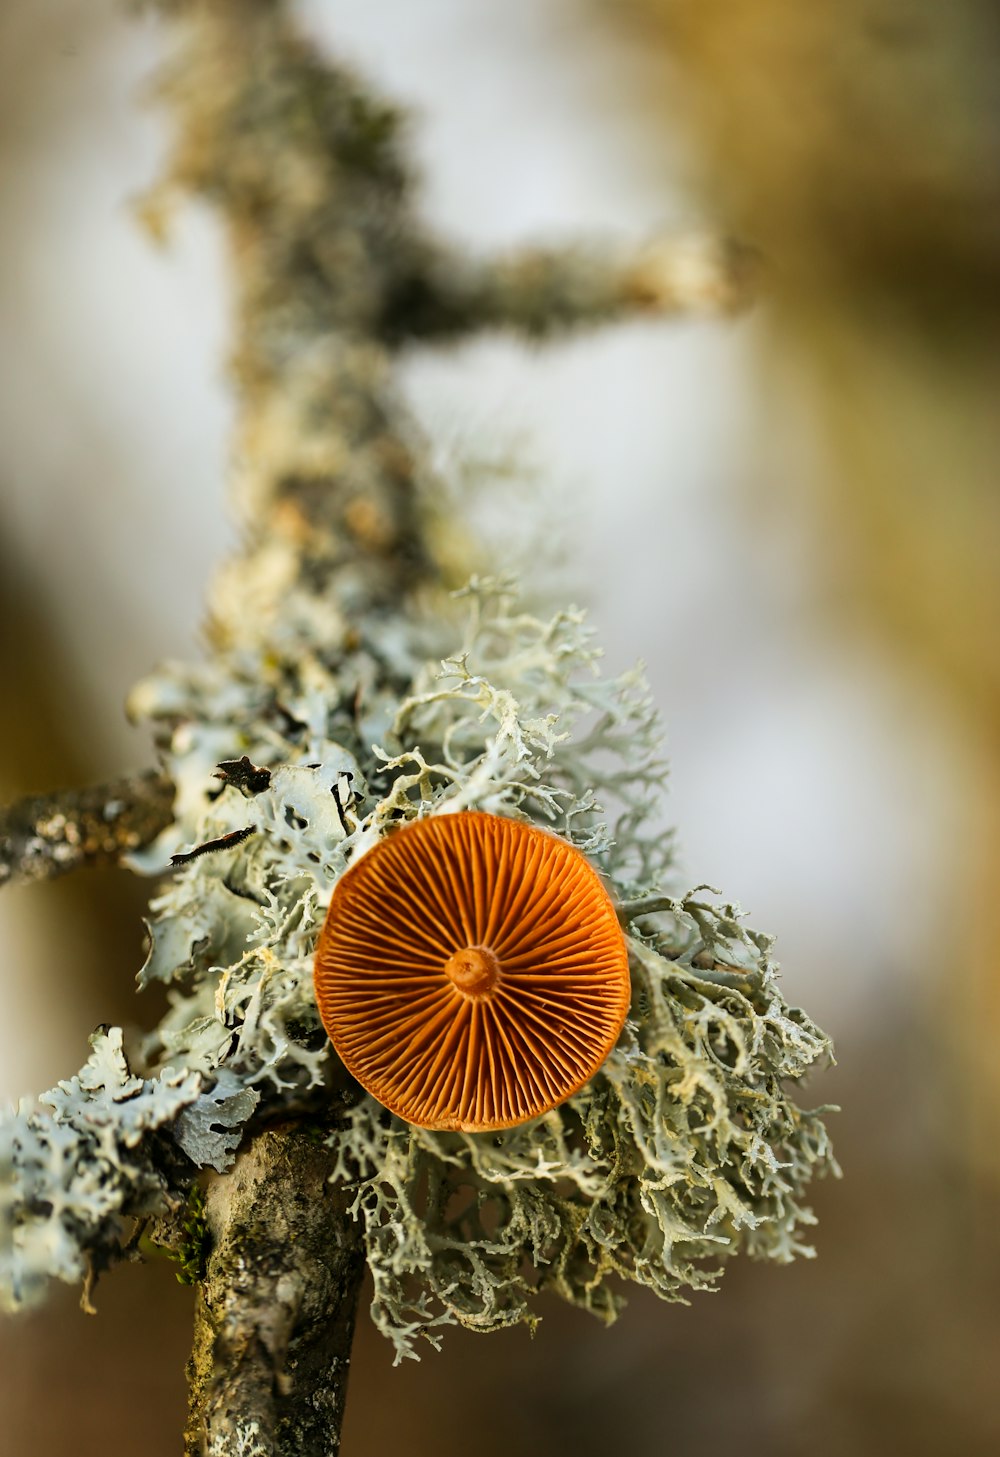 a close up of a small orange mushroom on a tree branch